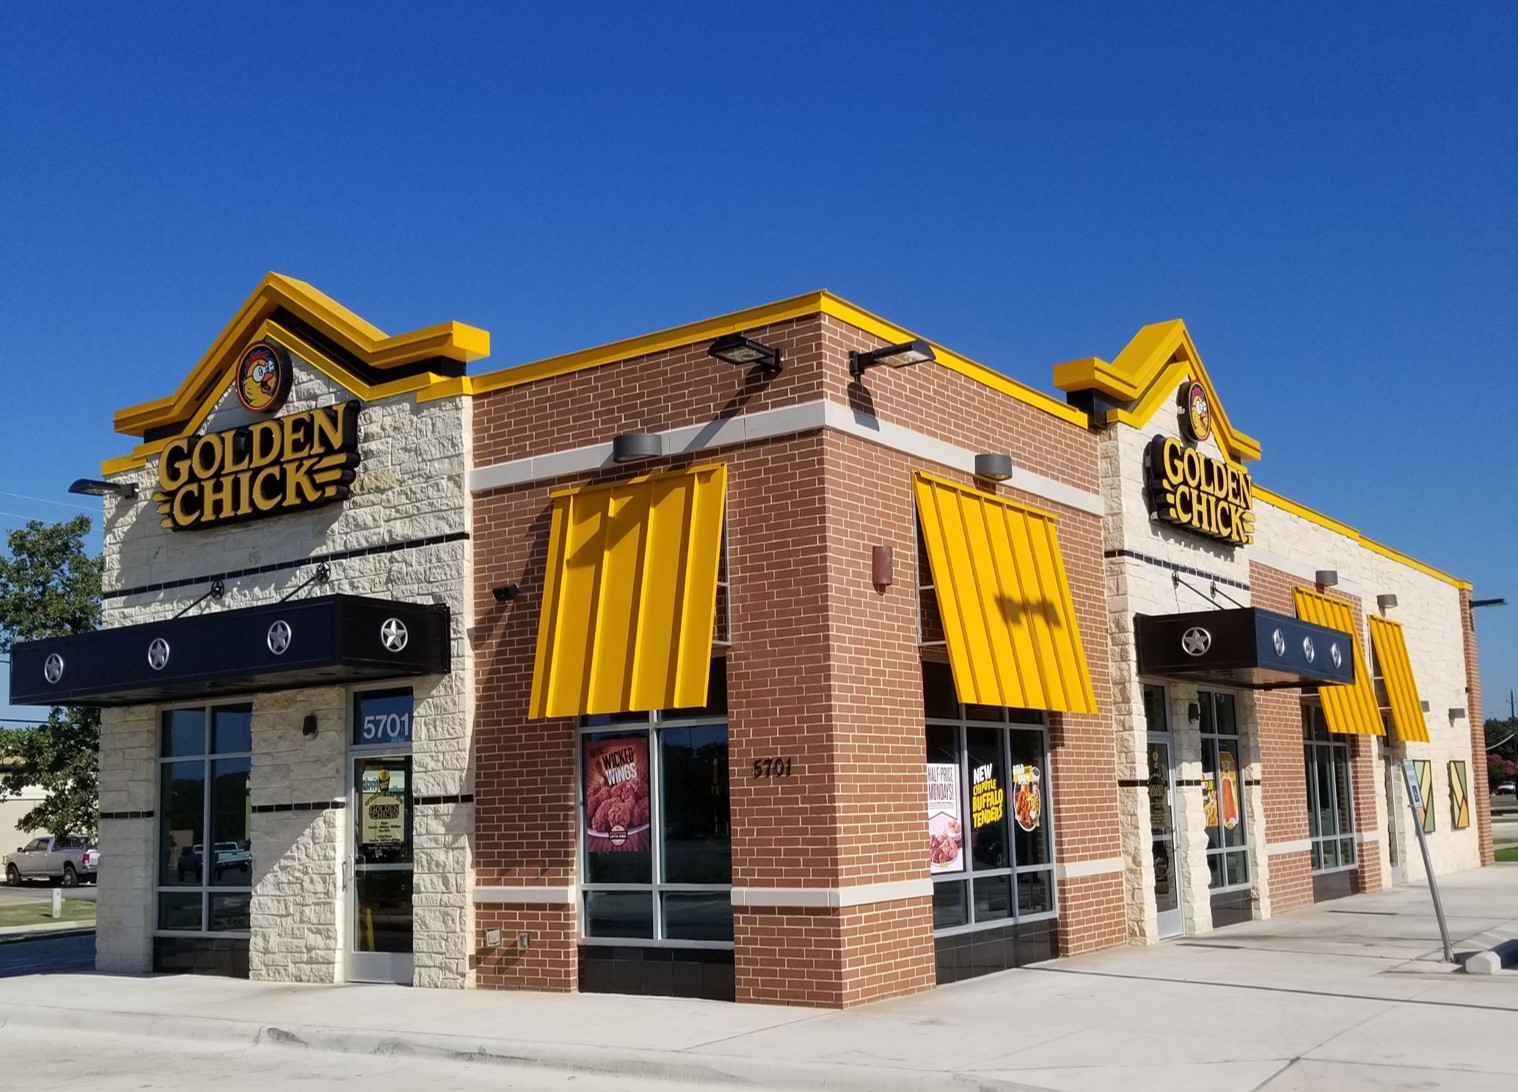 Golden Chick storefront.  Your local Golden Chick fast food restaurant in Fort Worth, Texas